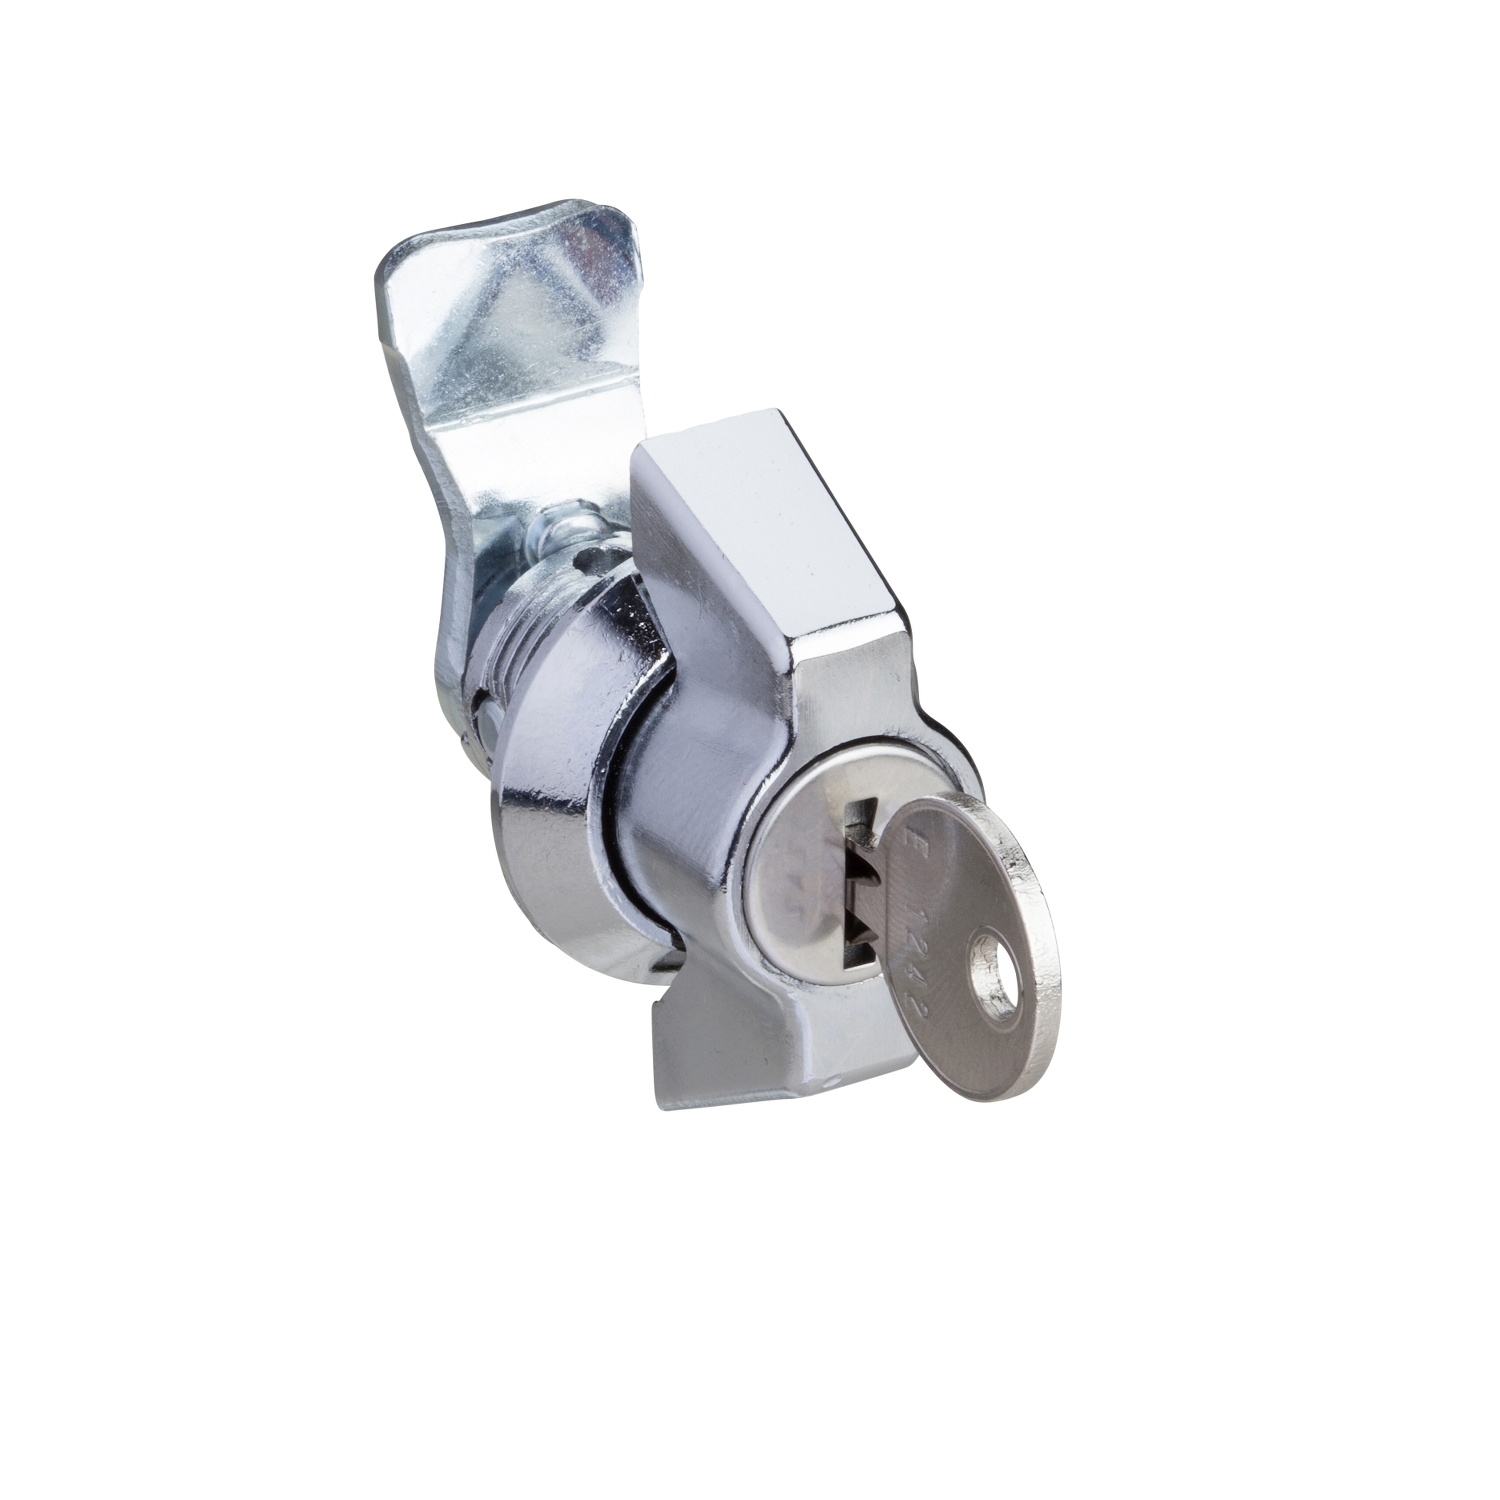 Replace. Round lock, DB 3mm, for Spacial S3X enclosure, 100% stainless steel